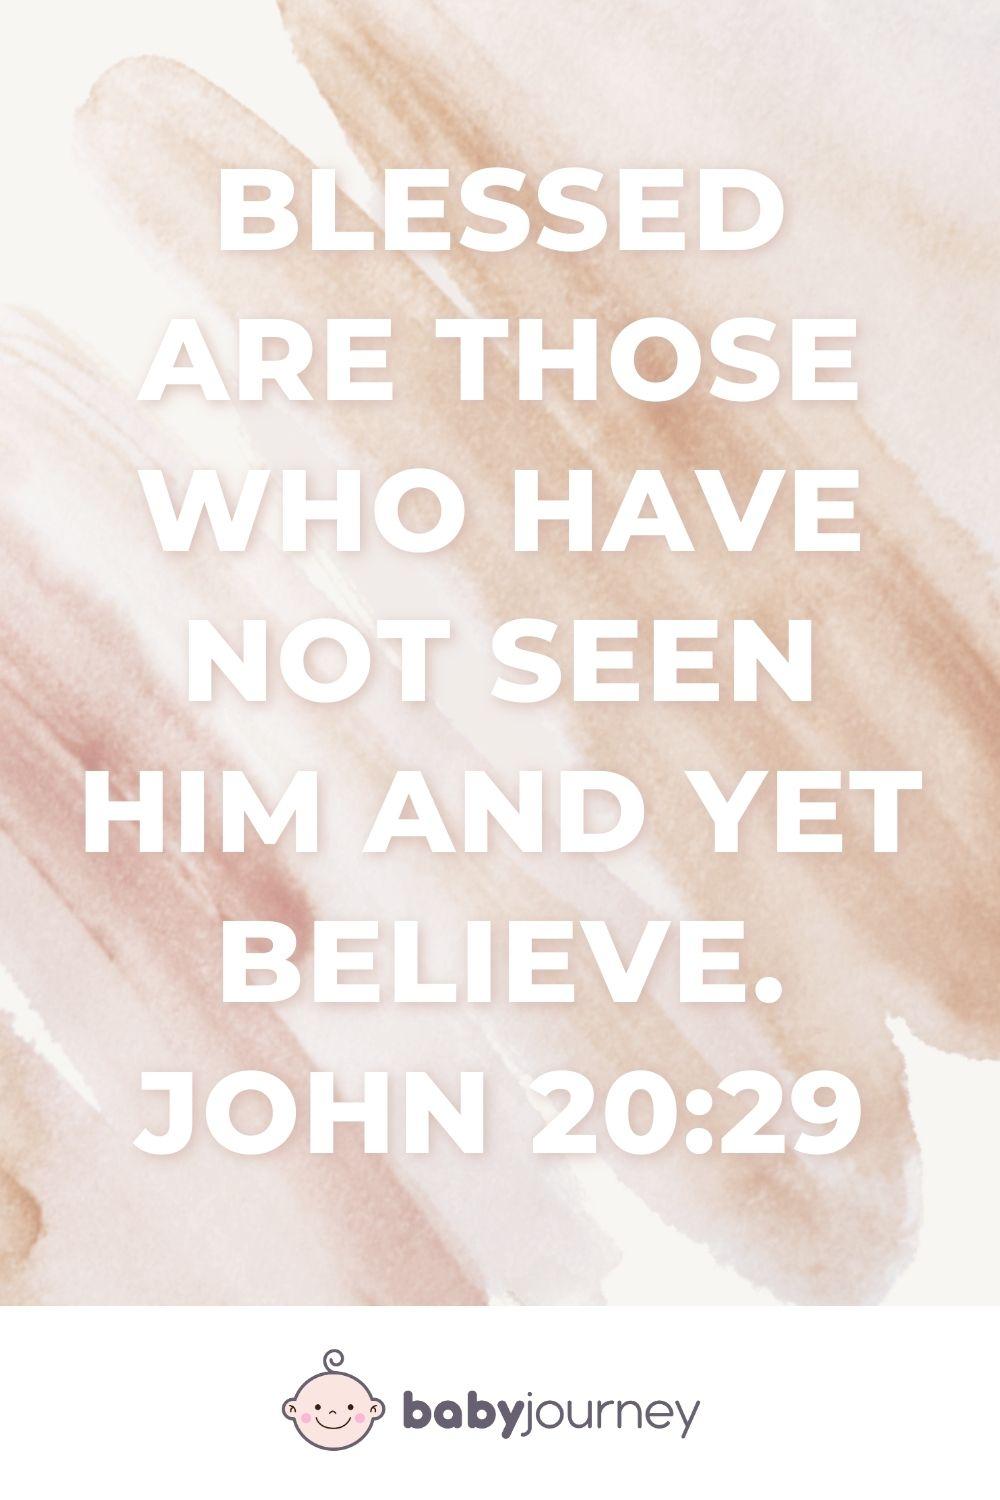 Blessed are those who have not seen Him and yet believe. John 20:29 - Bible baptism quotes - Baby Journey